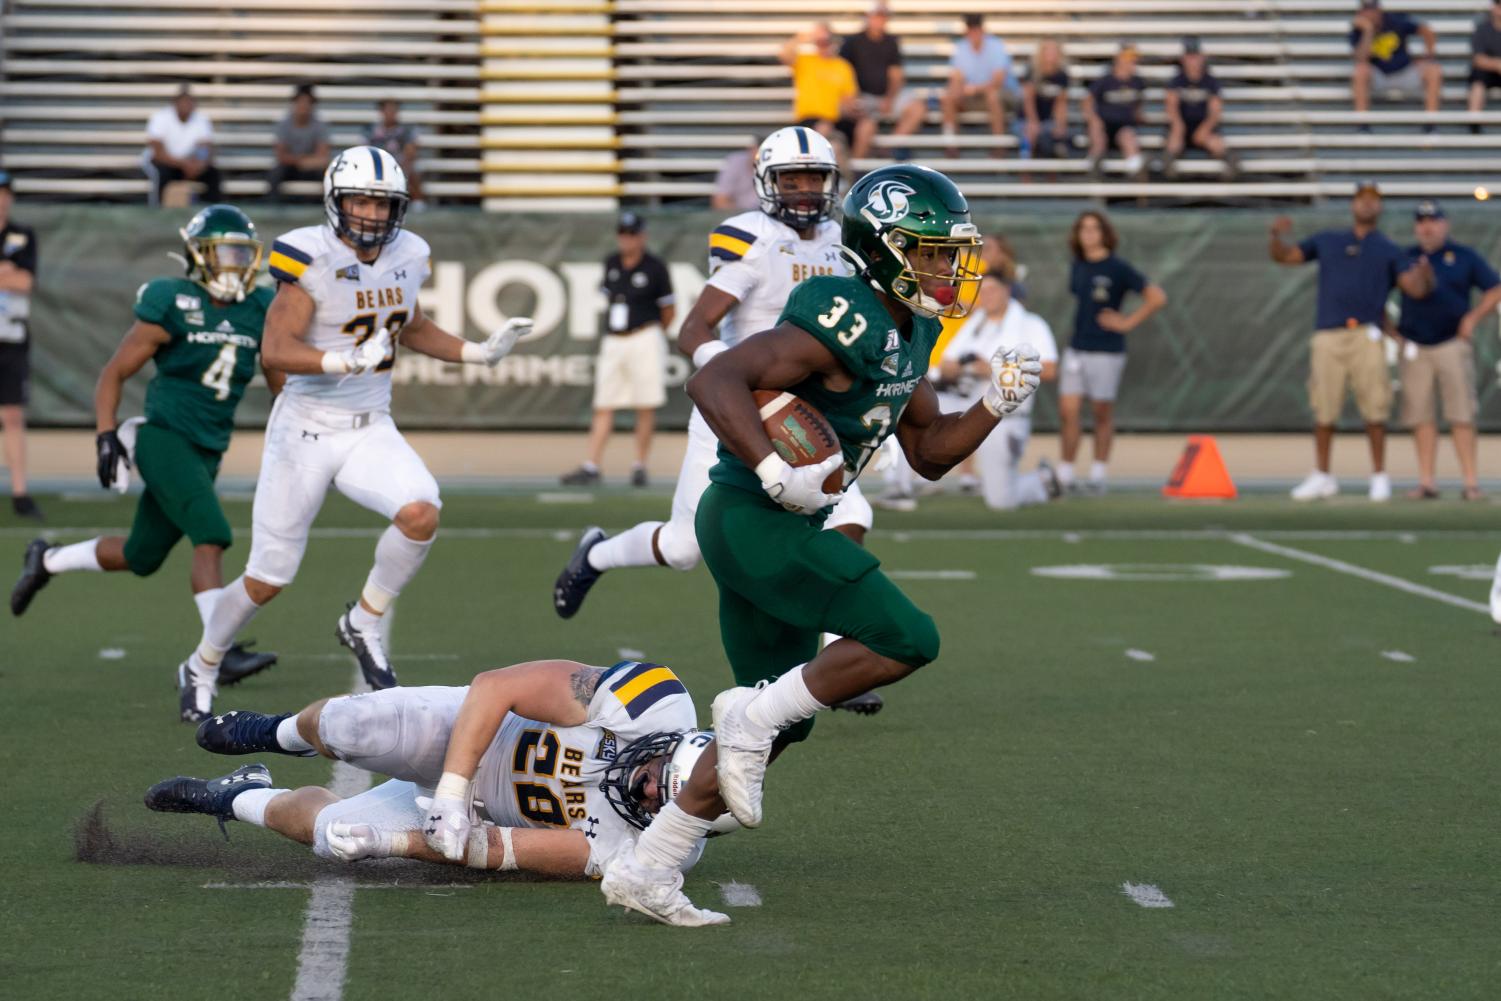 Sac State football team shuts out Northern Colorado 50-0 - The State Hornet